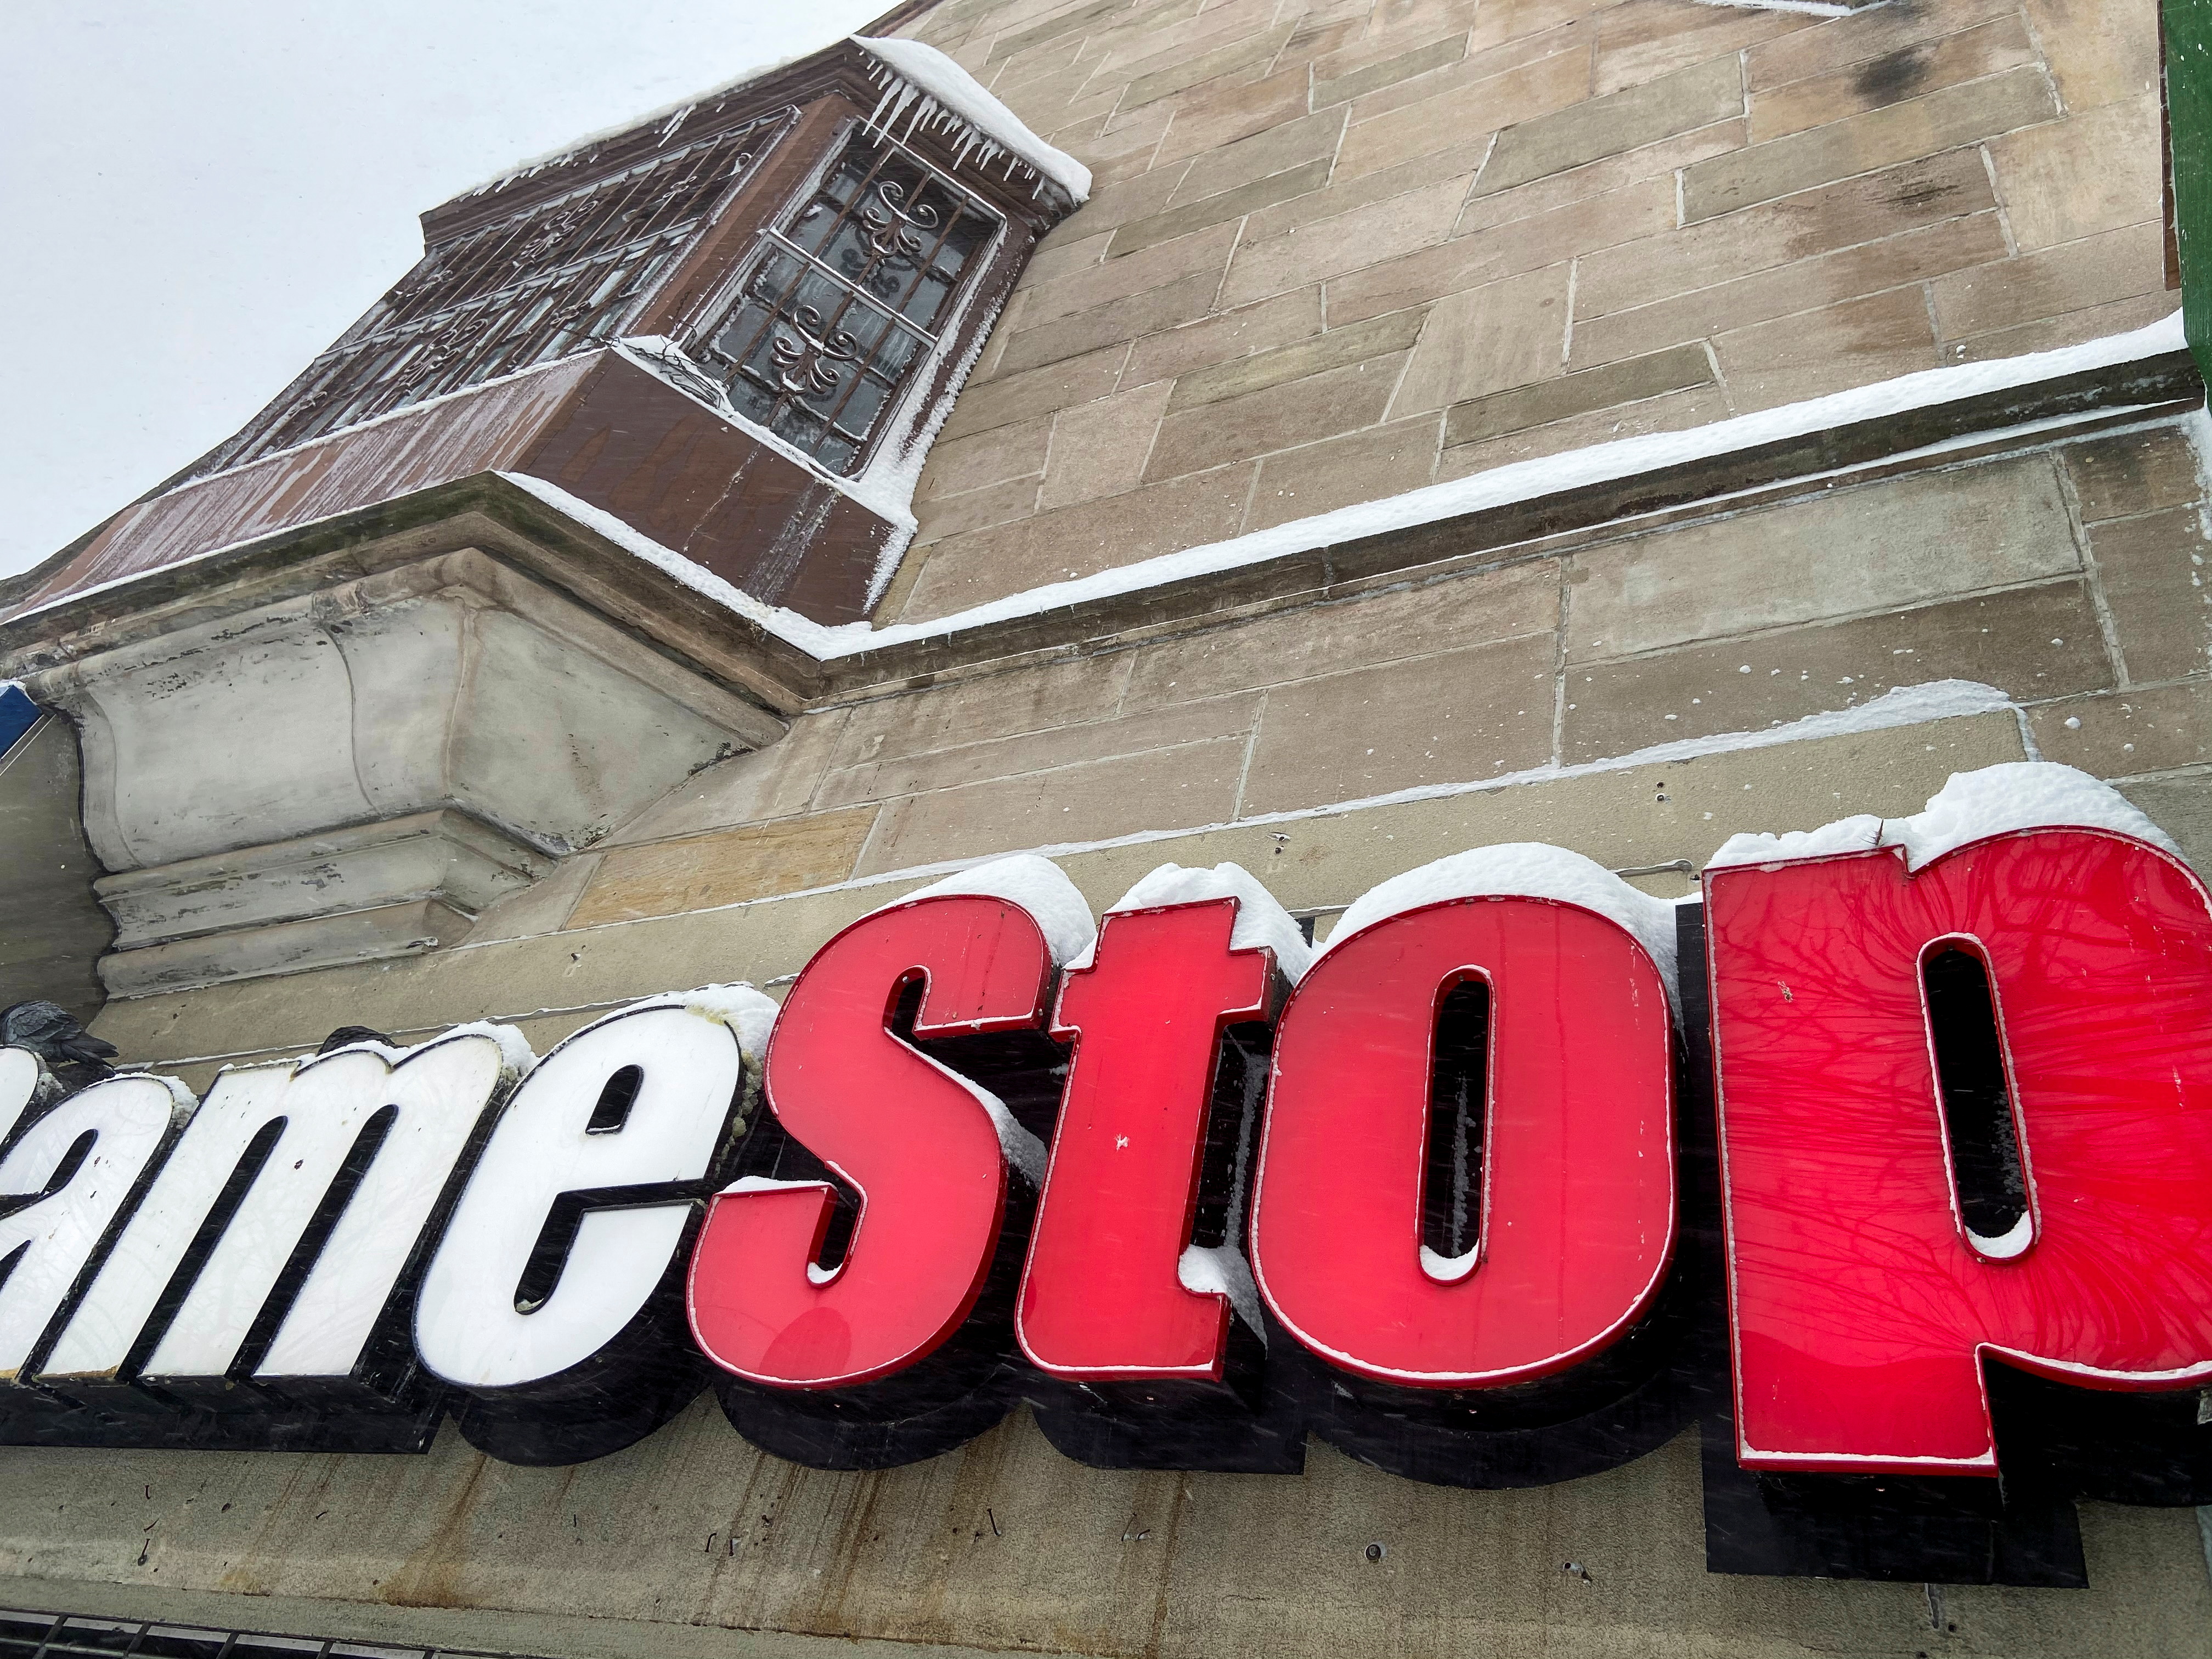 Snow settles on a GameStop sign in New York City